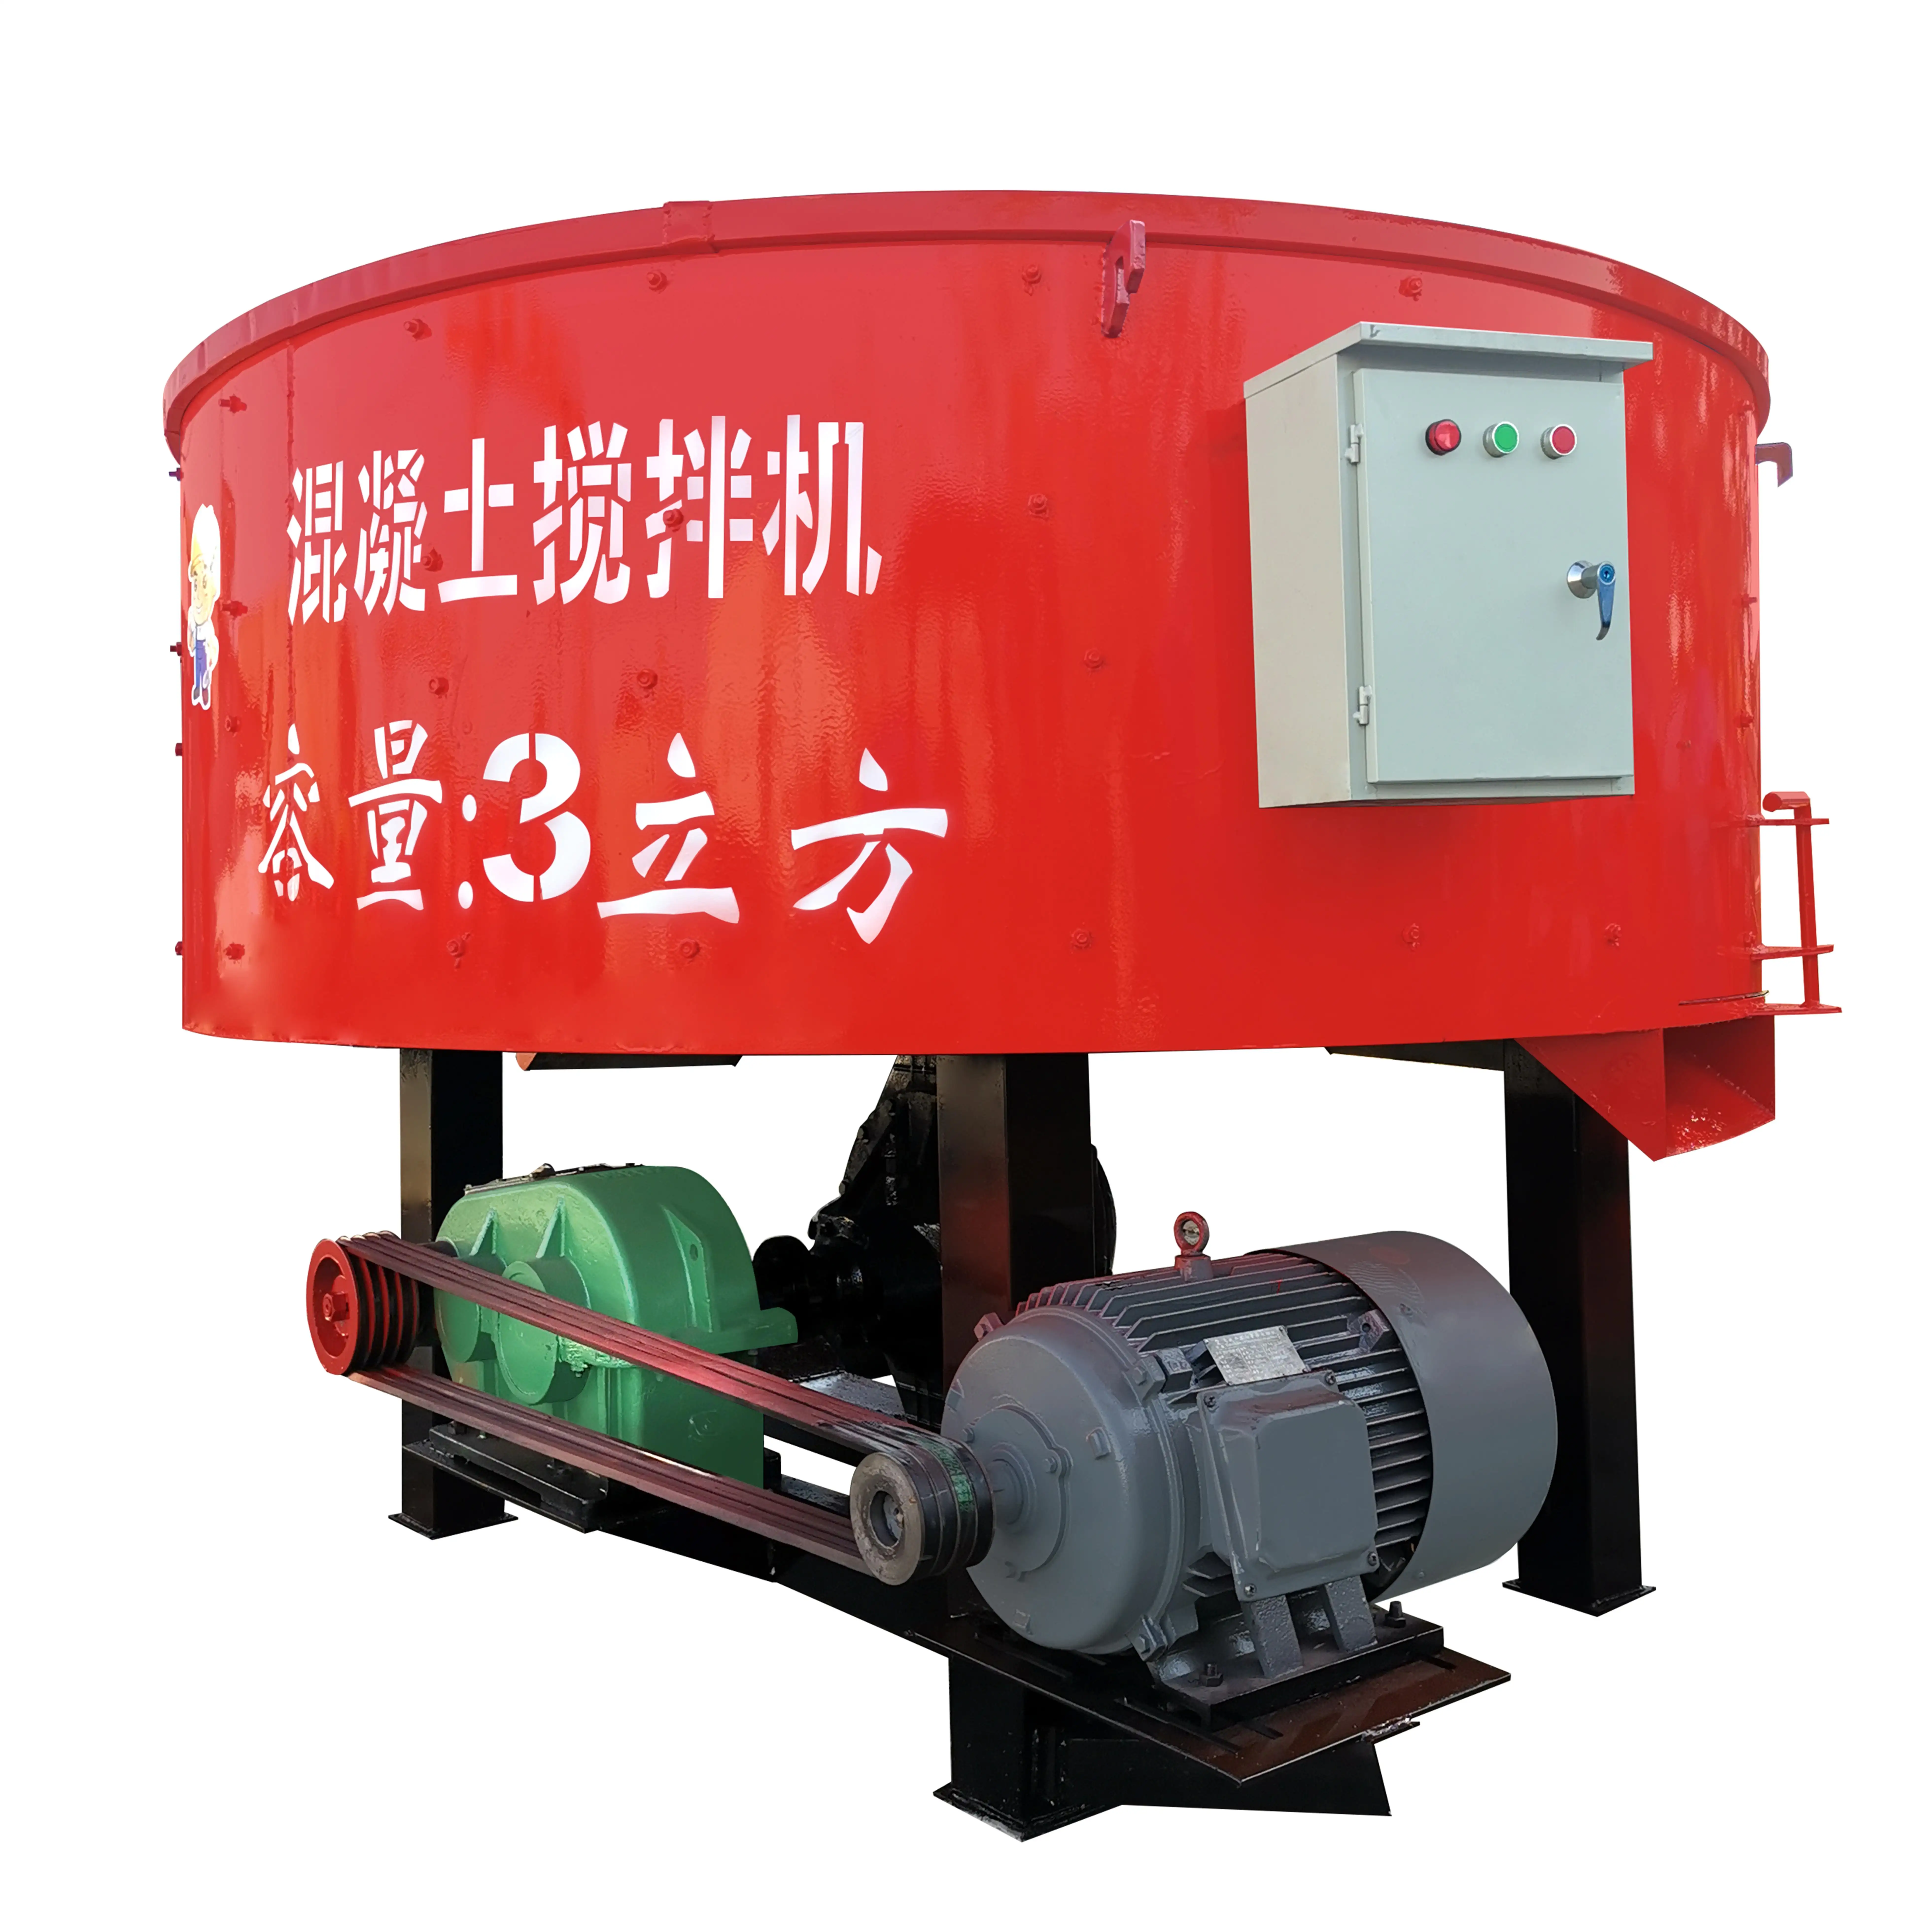 China Machinery Forced Vertical JW Series Electric Diesel Concrete Cement Pan Mixer Machine